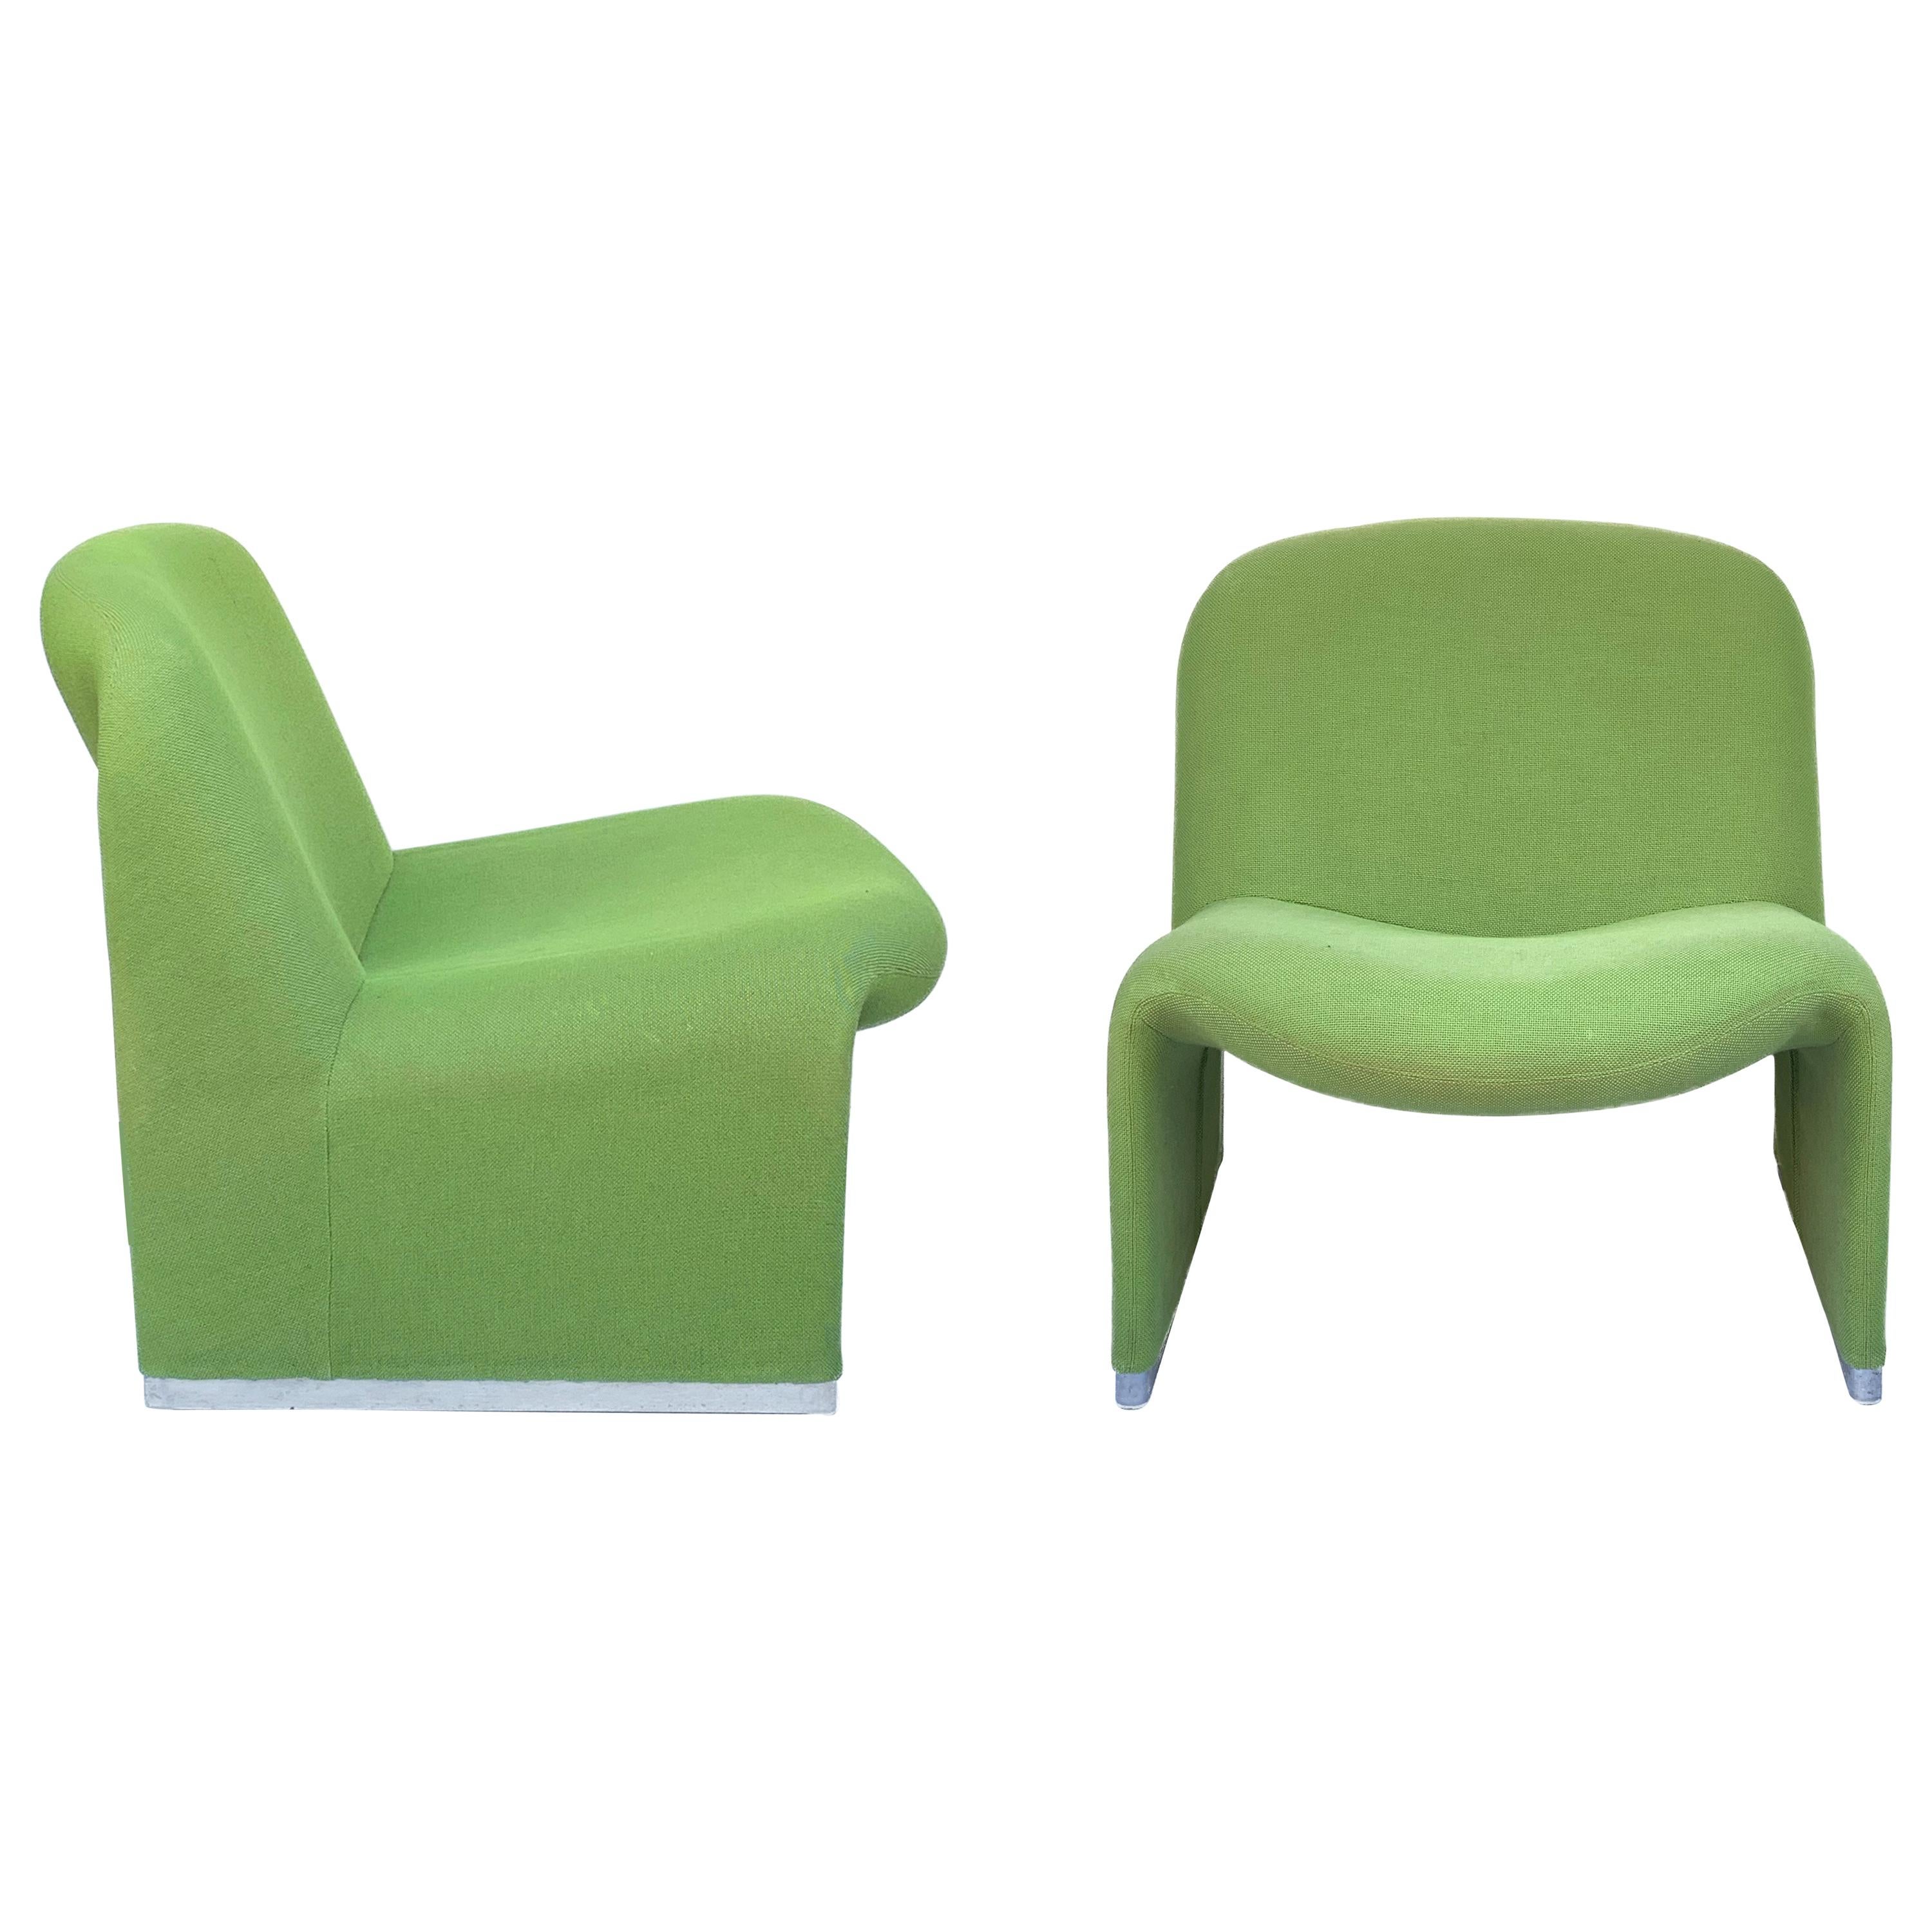 Pair of Green Alky Armchairs by Giancarlo Piretti for Castelli, Italy, 1970s